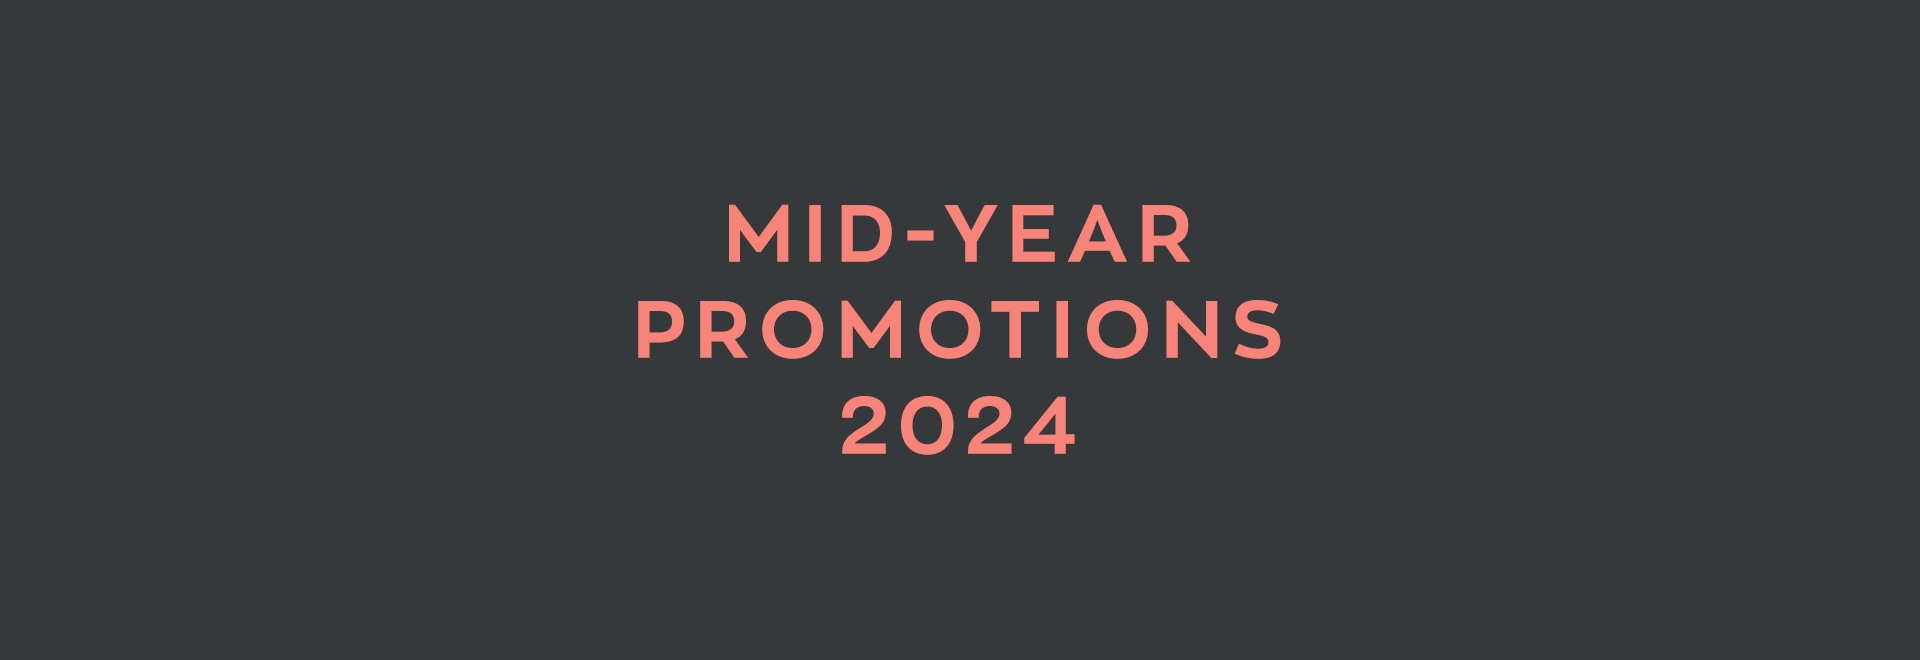 Mid Year Promotions 2024